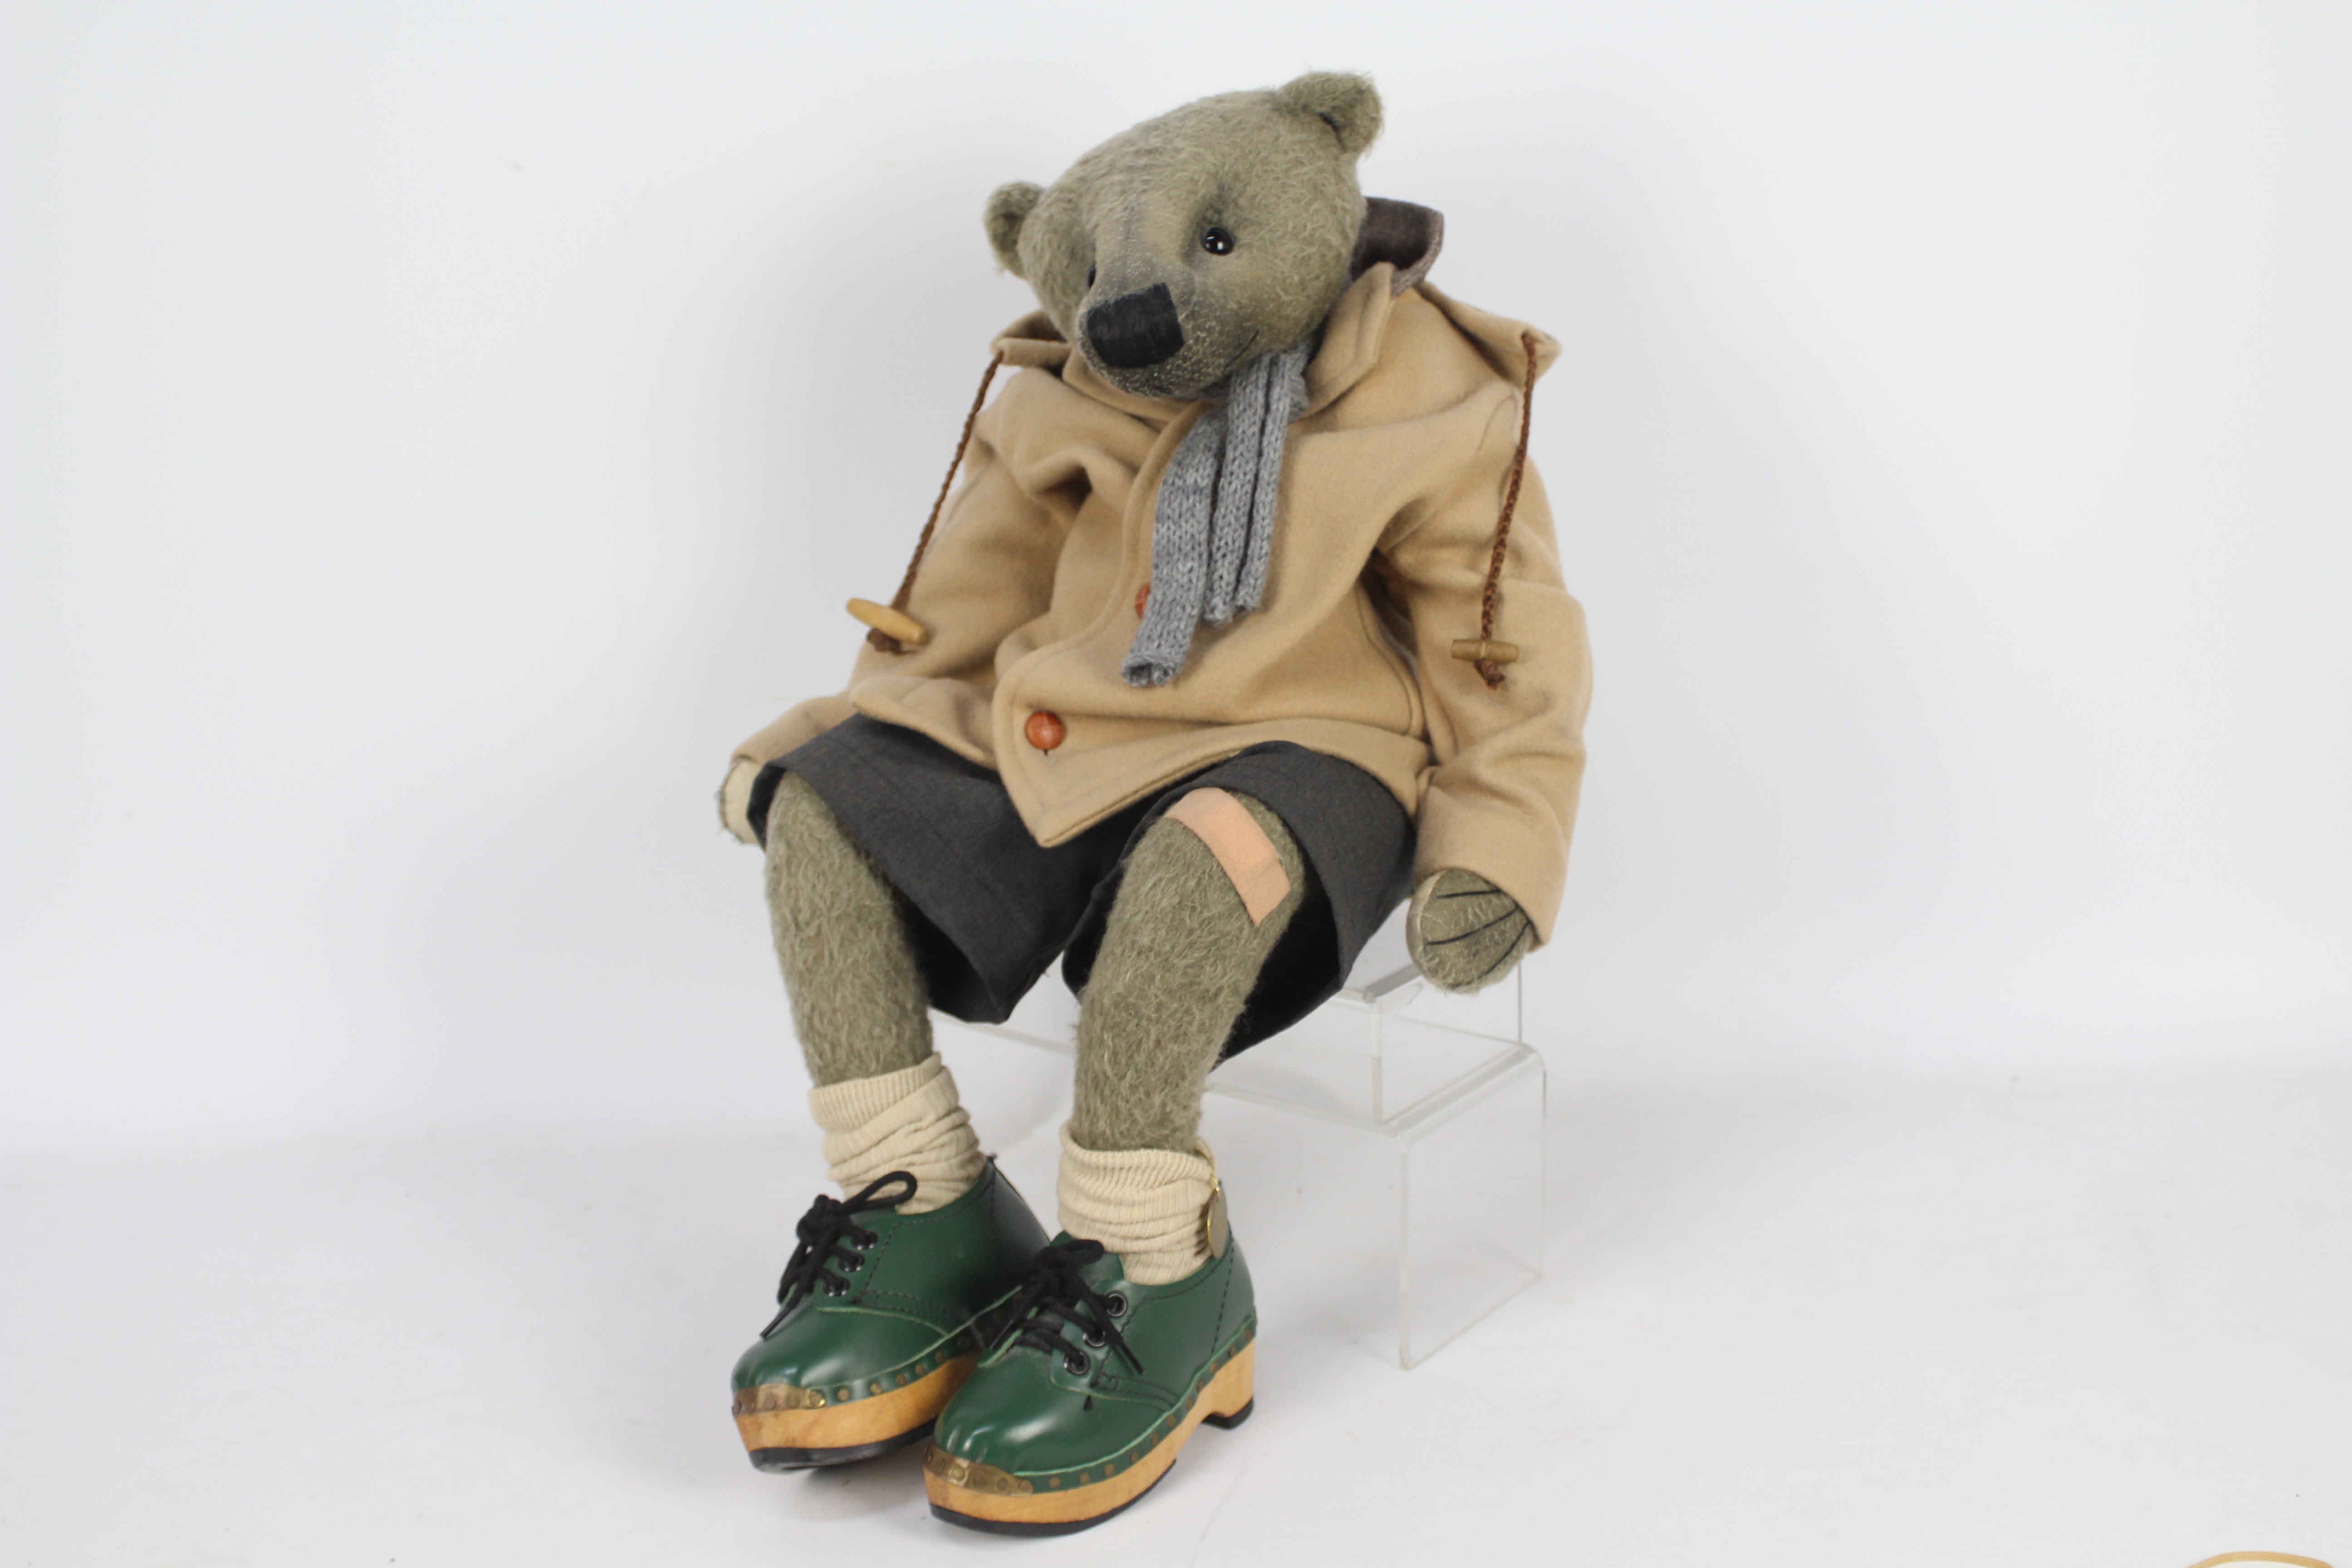 Parkside Bears - A large seated jointed bear called Walt made by Parkside Bears. - Image 4 of 5